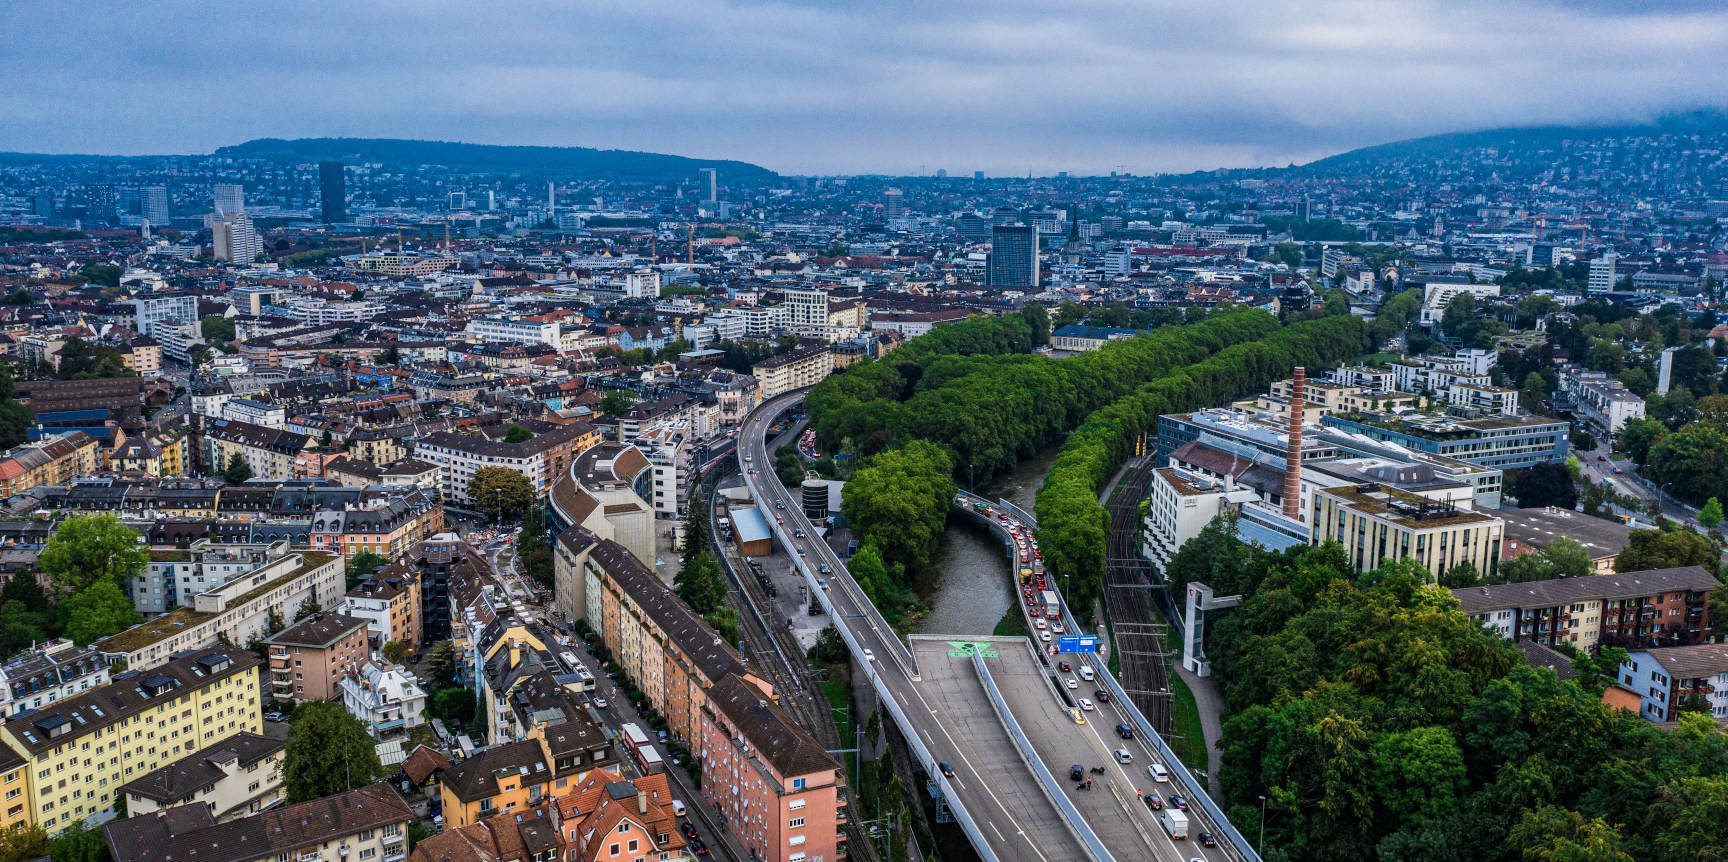 Enlarged view: Traffic congestion in the city of Zurich